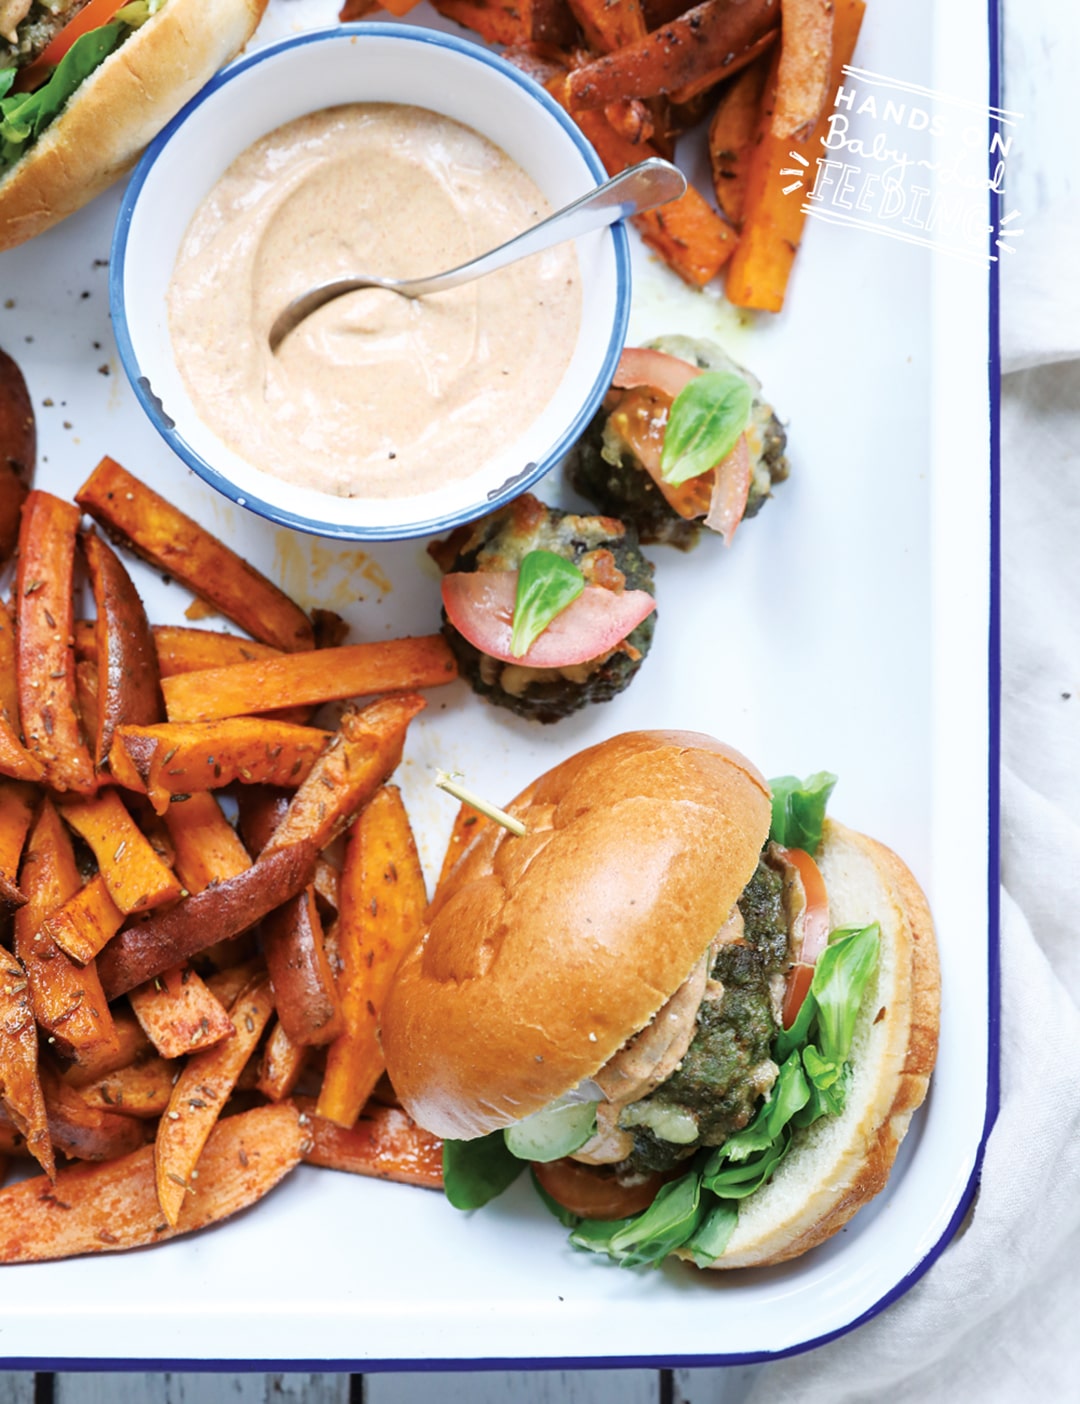 Veggie Loaded Baby Burgers with Cajun Sauce. This little burger is like an entire salad cooked into a slider sized burger! Served with a zesty (not spicy) yogurt based Cajun sauce and crispy-sweet sweet potato fries. #babyledweaning #sliders #bbq #healthyrecipe